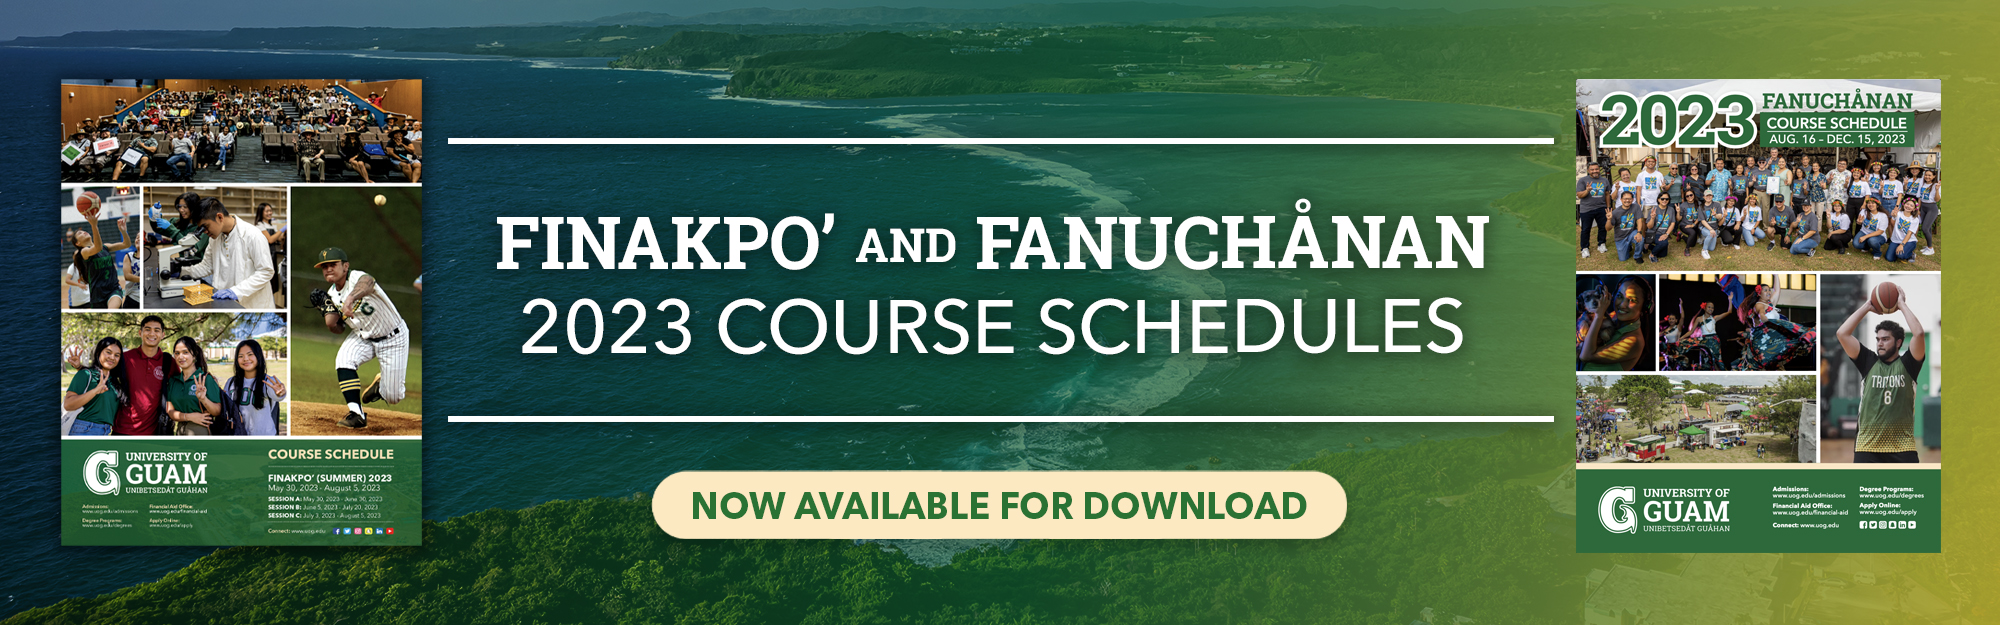 Finakpo' (Summer) 2023 and Fanuchånan (Fall) 2023 Course Schedules now available!